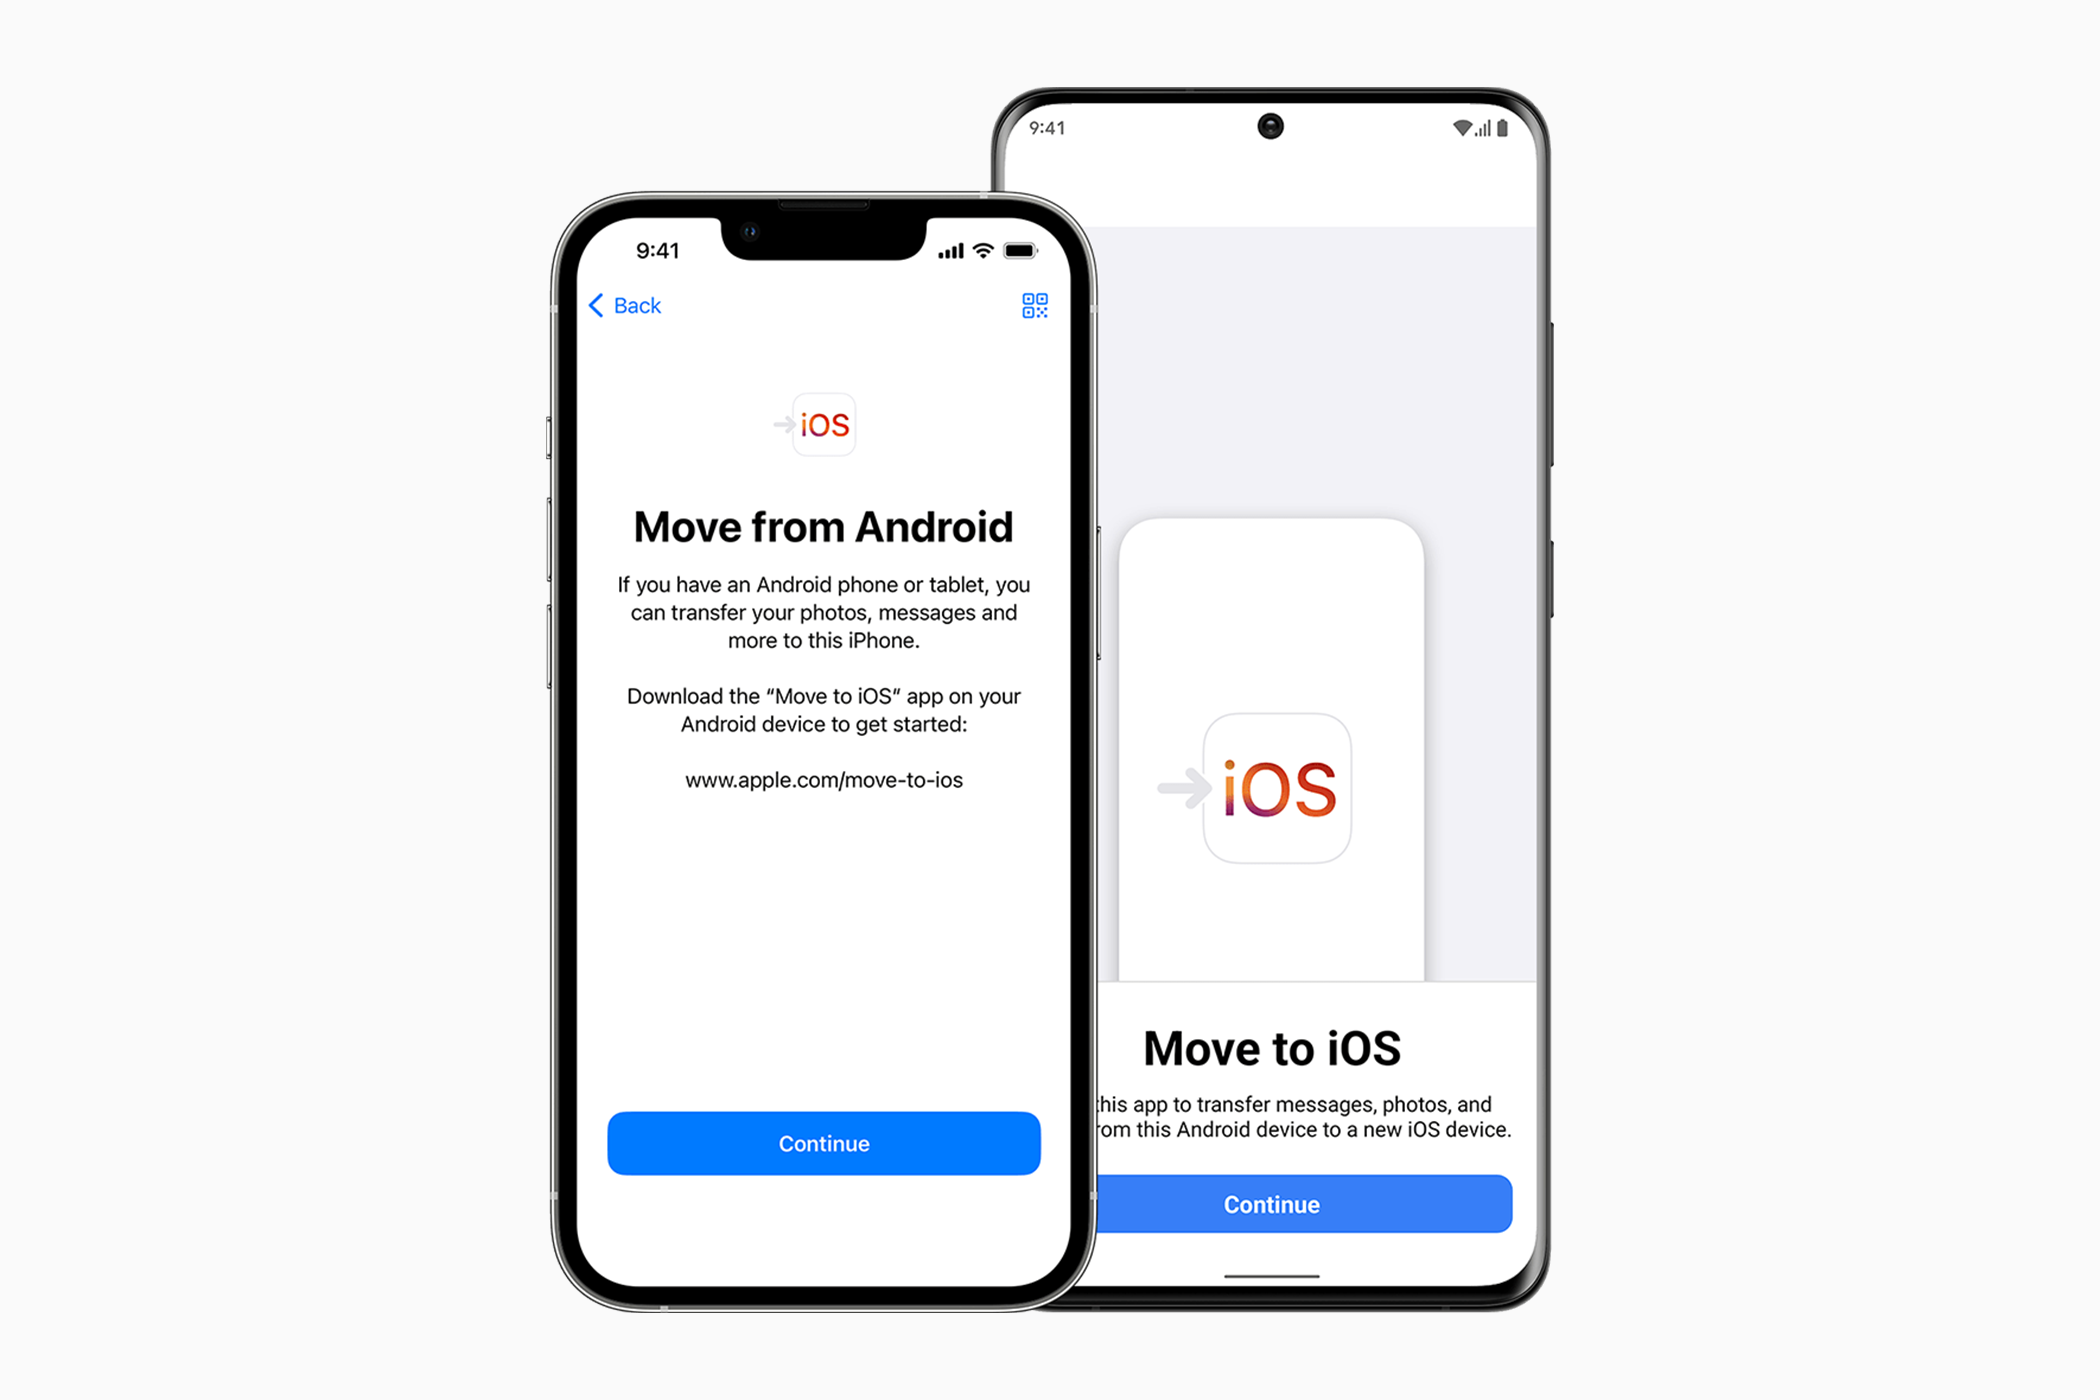 Screenshots of the Move to iOS app on an iPhone and an Android phone.